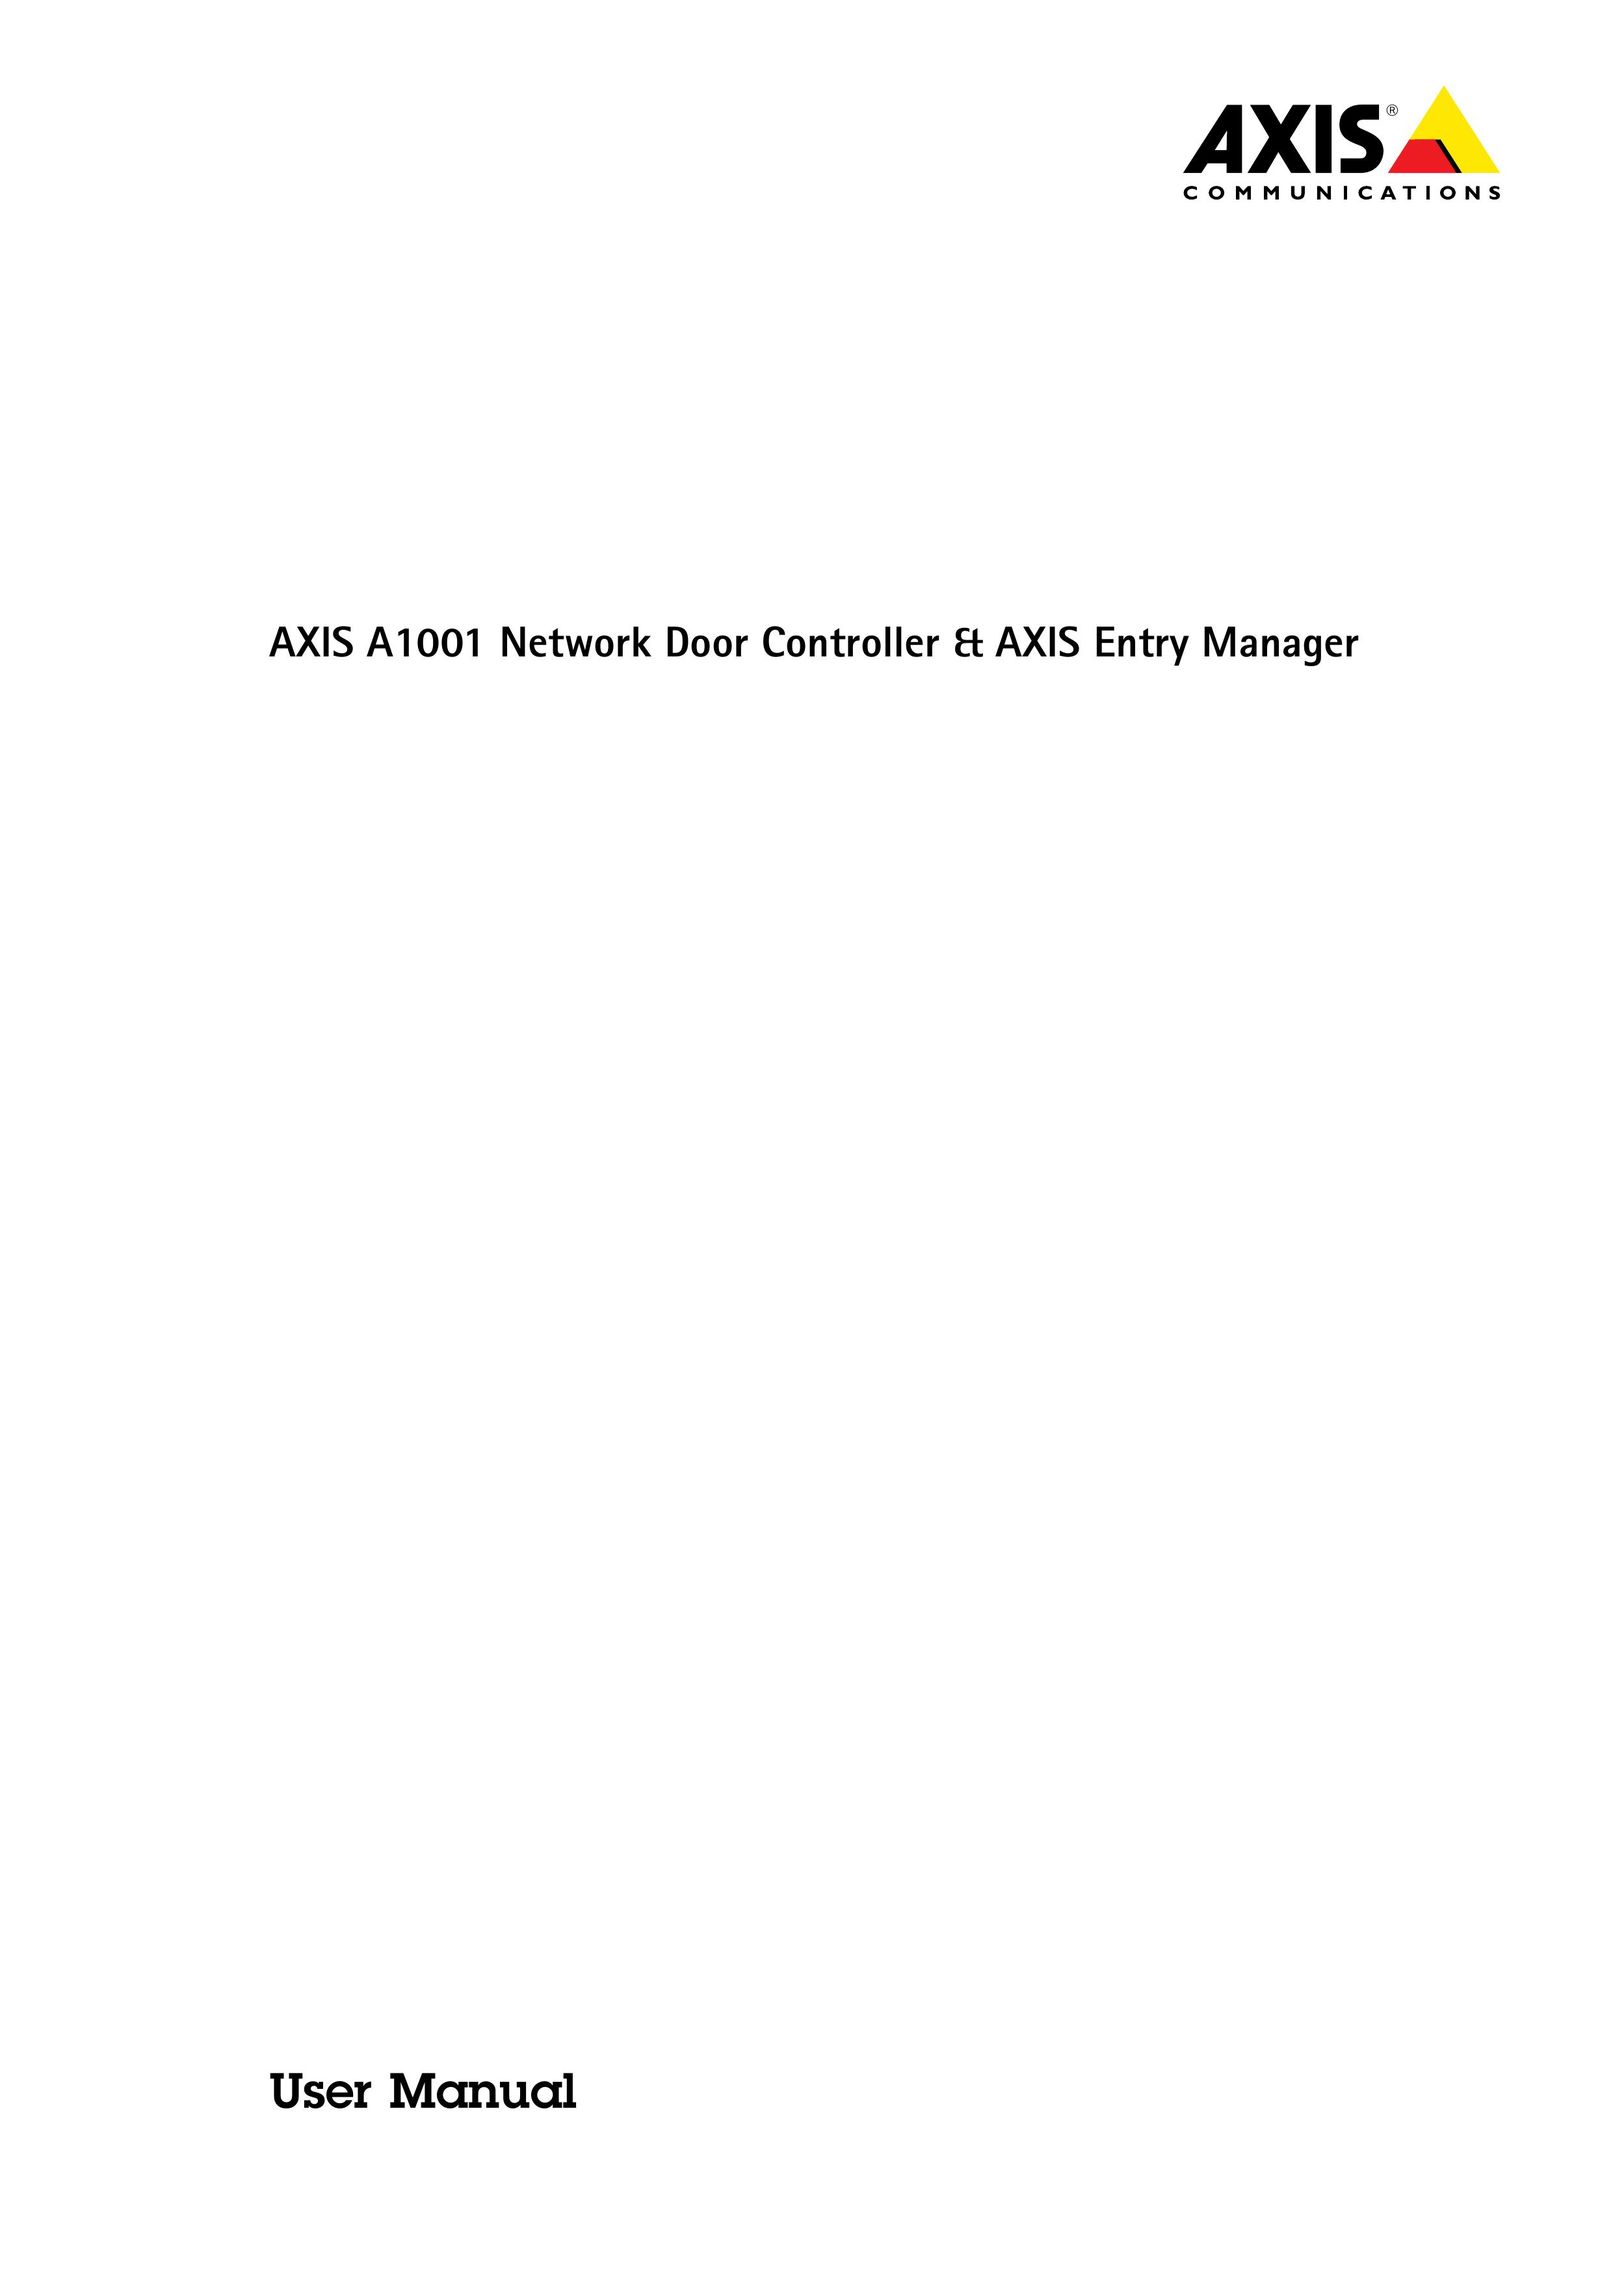 Axis Communications A1001 Network Router User Manual